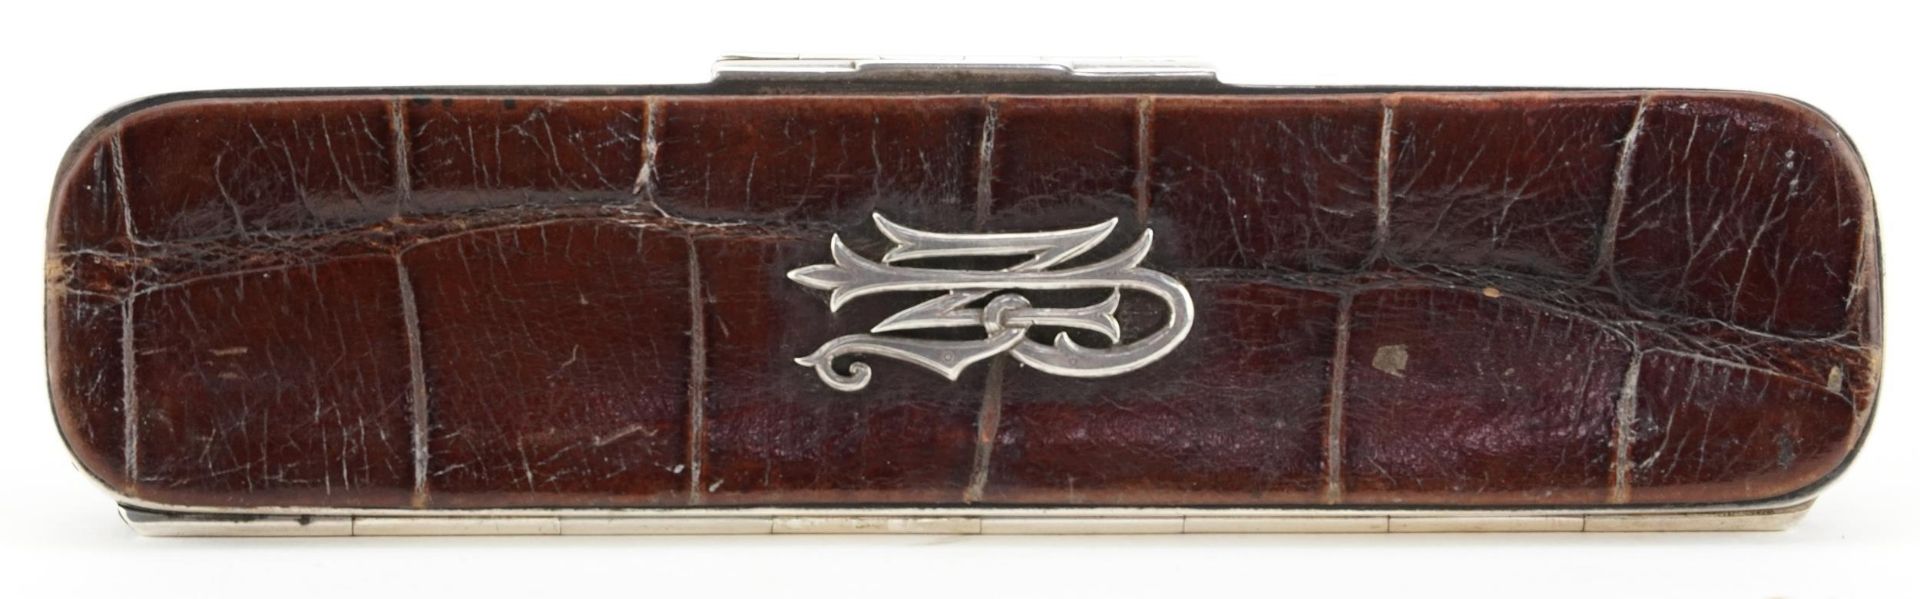 Early Victorian silver and crocodile pen case with coat of arms In Crugefides, William M Traies - Image 5 of 5